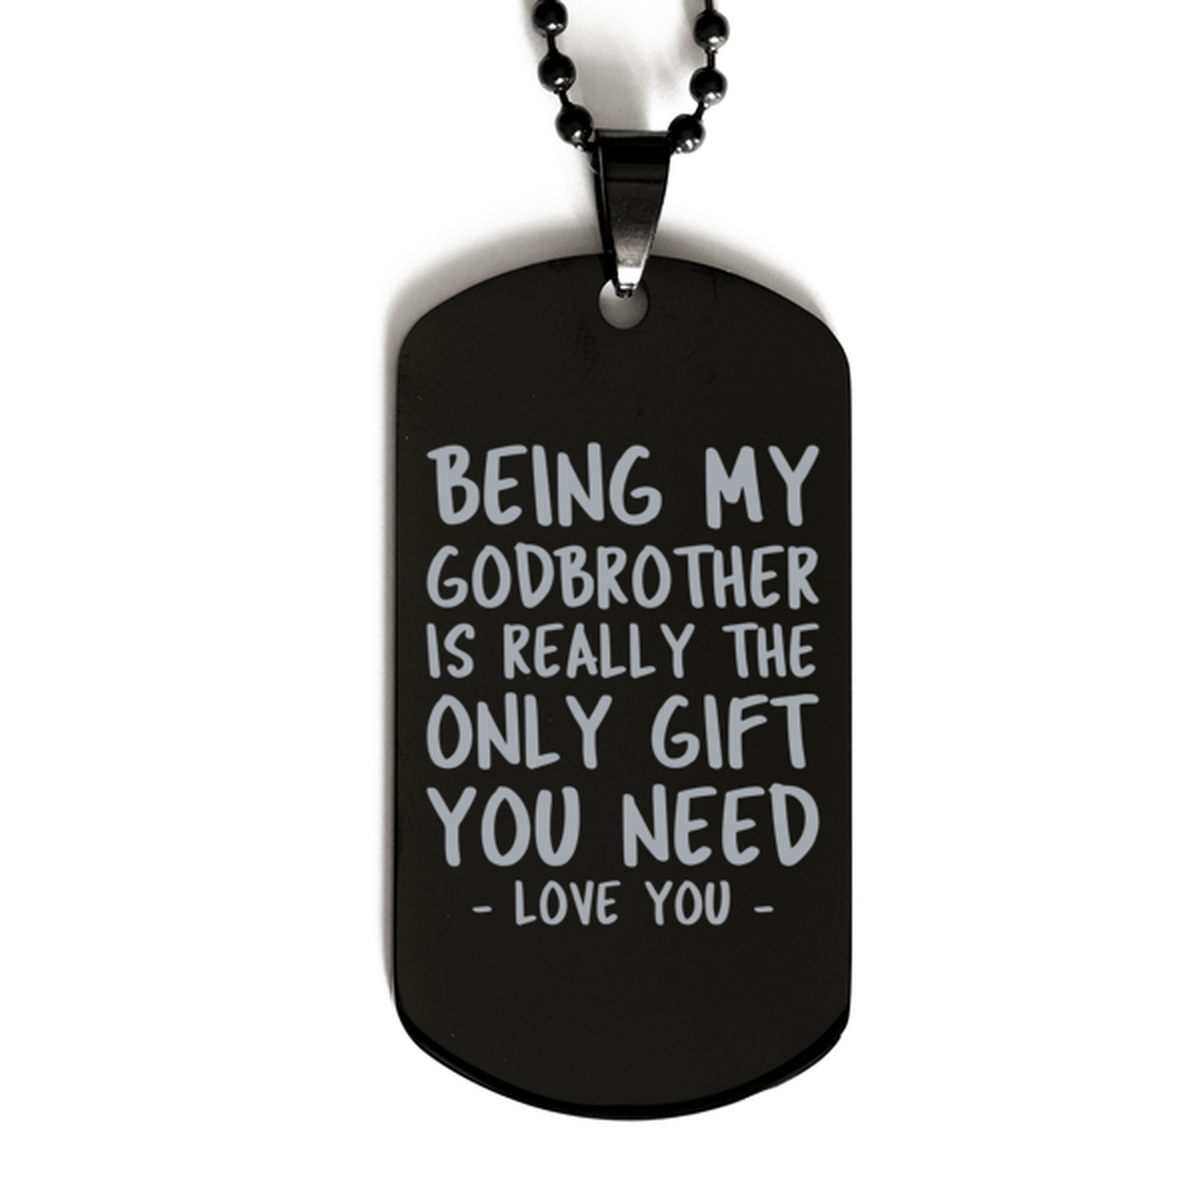 Funny Godbrother Black Dog Tag Necklace, Being My Godbrother Is Really the Only Gift You Need, Best Birthday Gifts for Godbrother